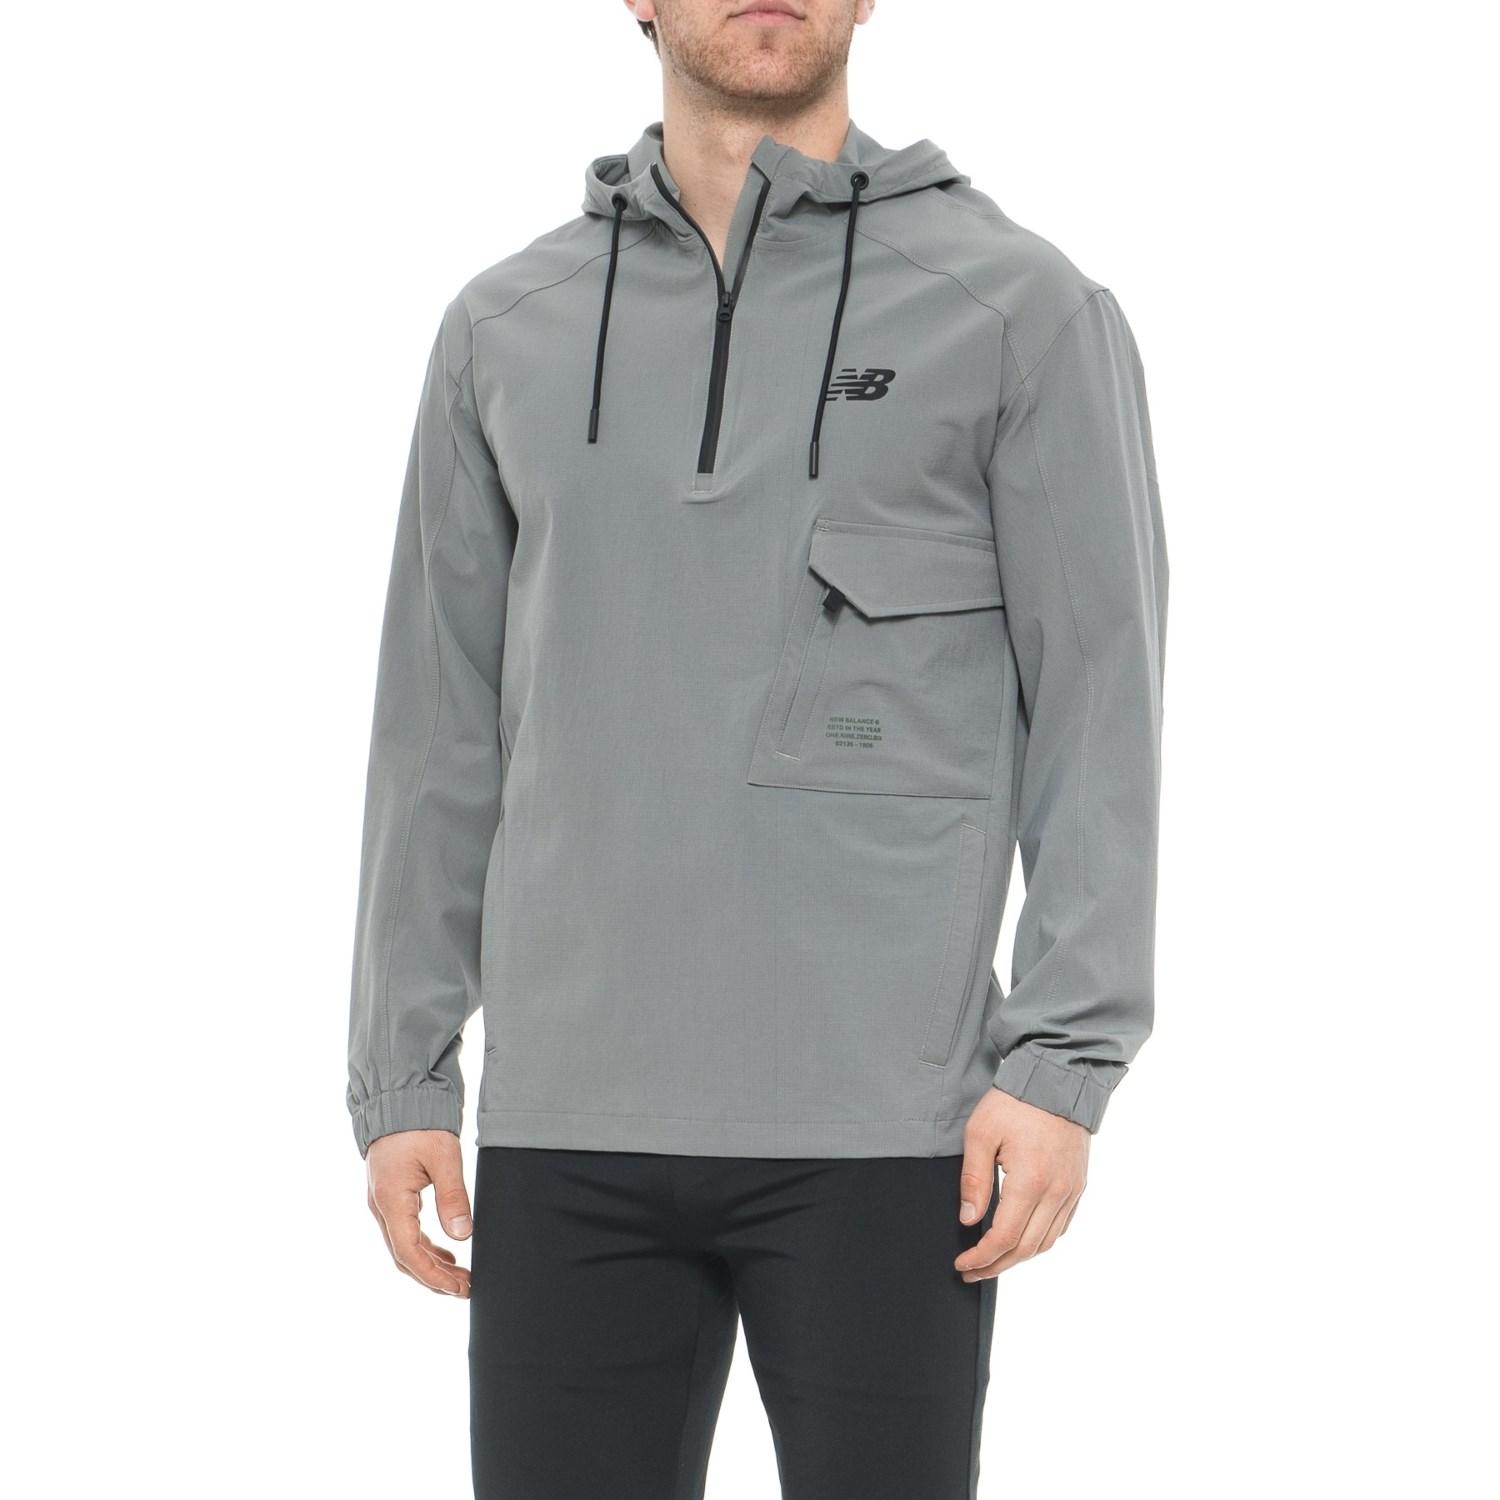 New Balance Synthetic 247 Sport Anorak Jacket in Gray for Men - Lyst